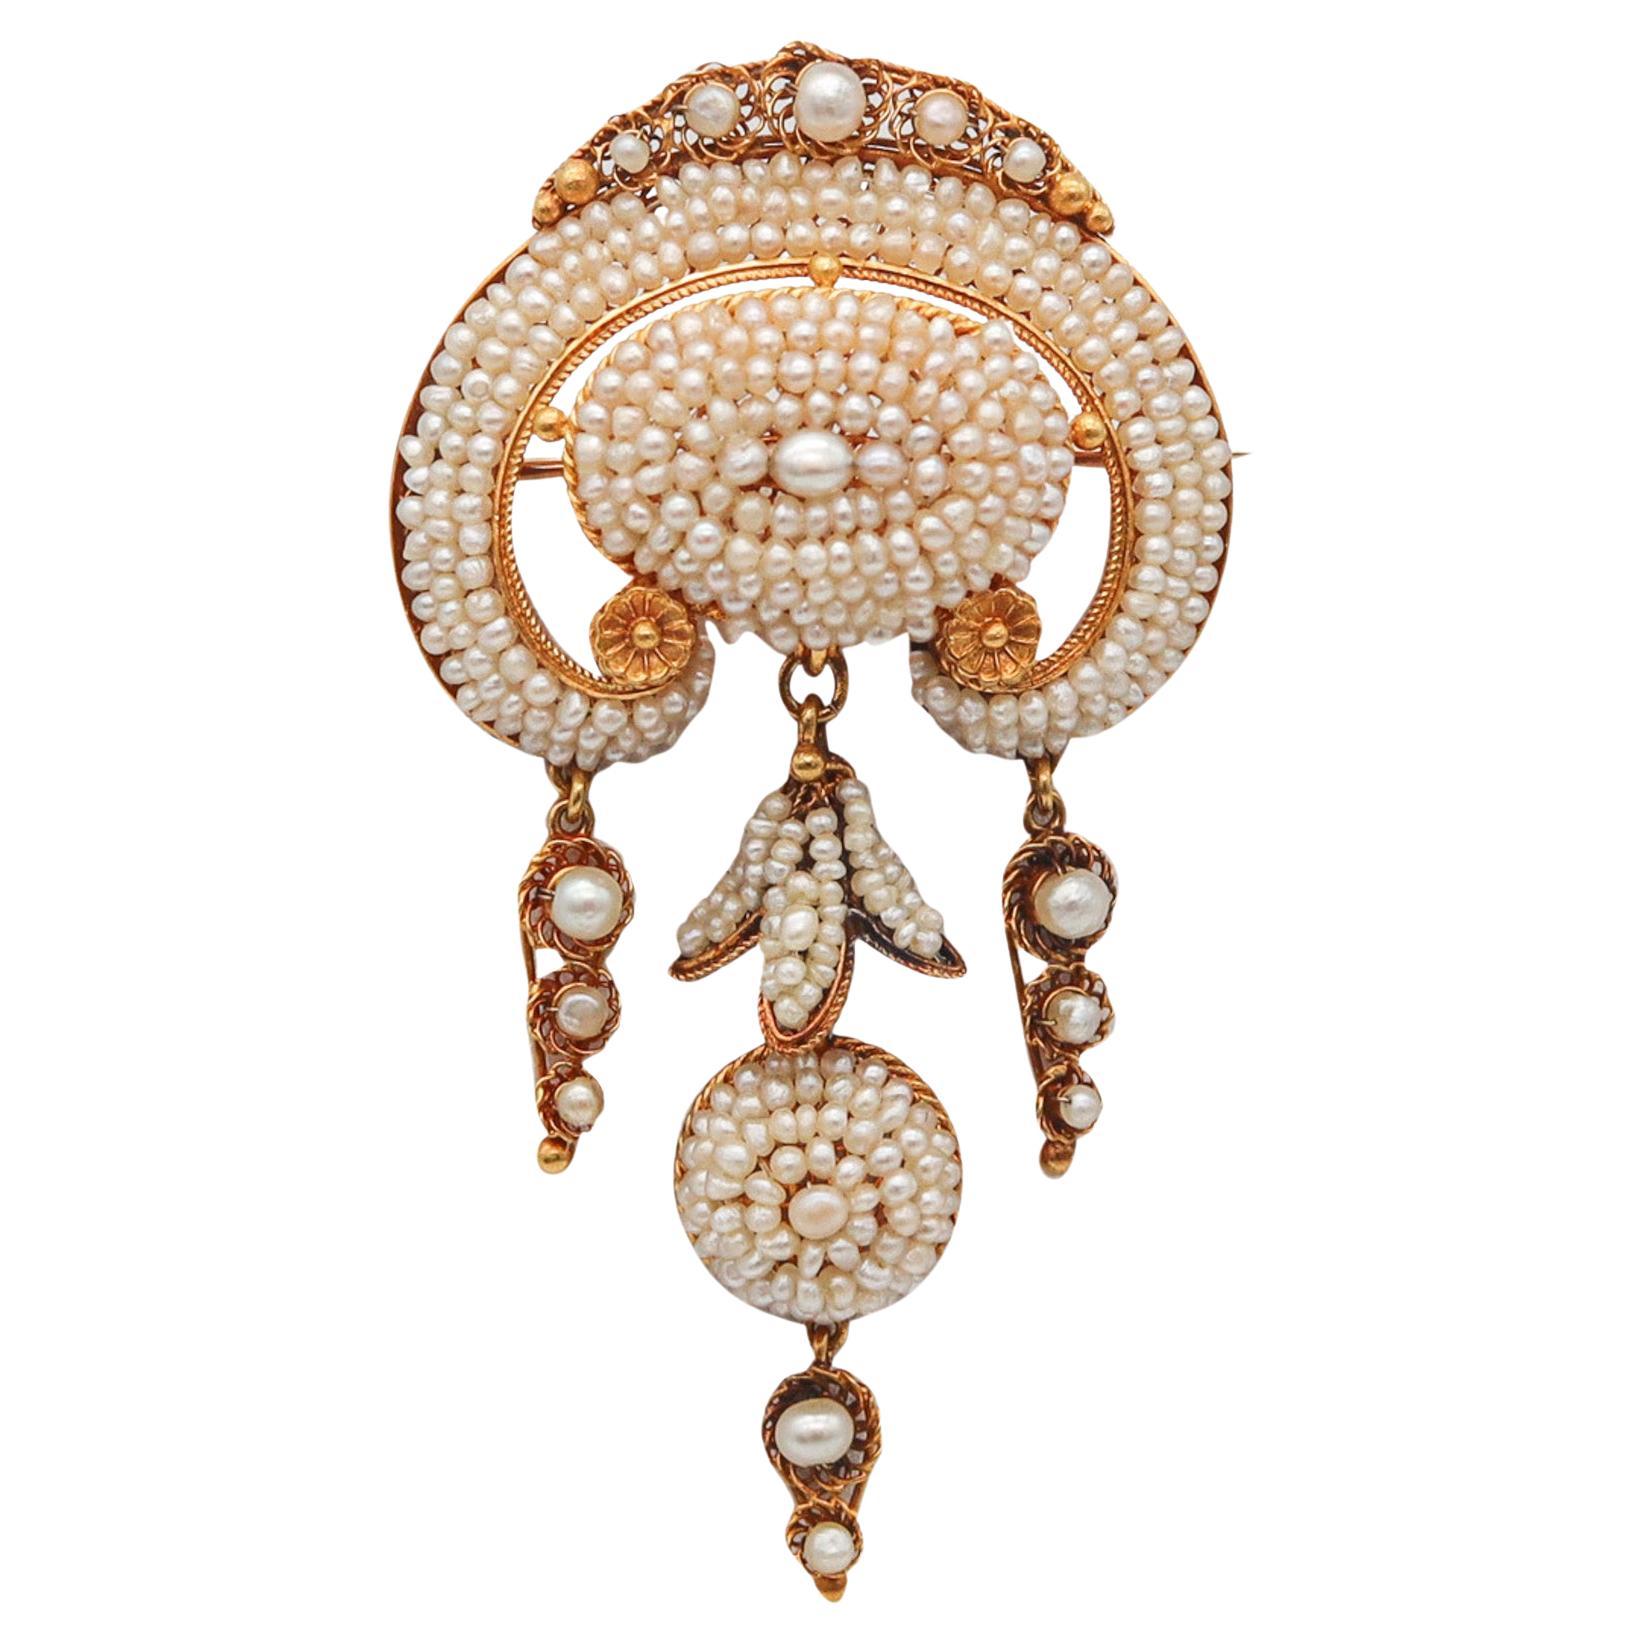 Portuguese Iberian 1850 Filigree Brooch In 21Kt Yellow Gold With Seed Pearls